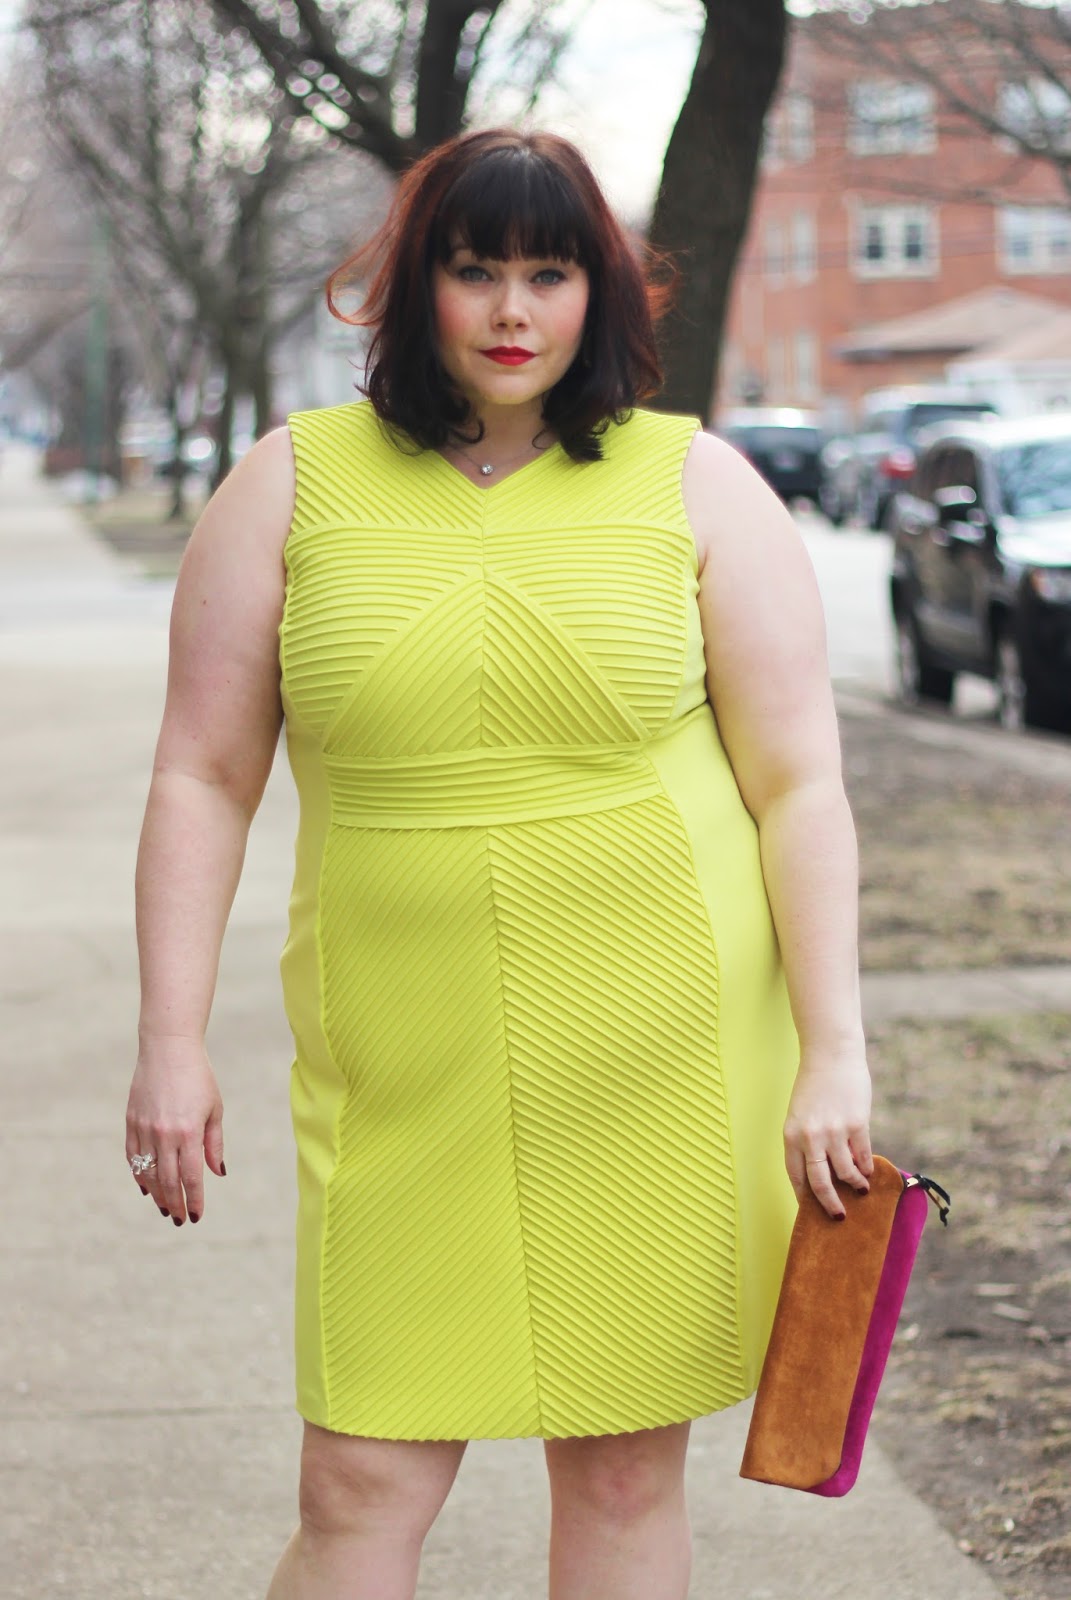 #Girlboss OOTD: Standing out in Neon Yellow